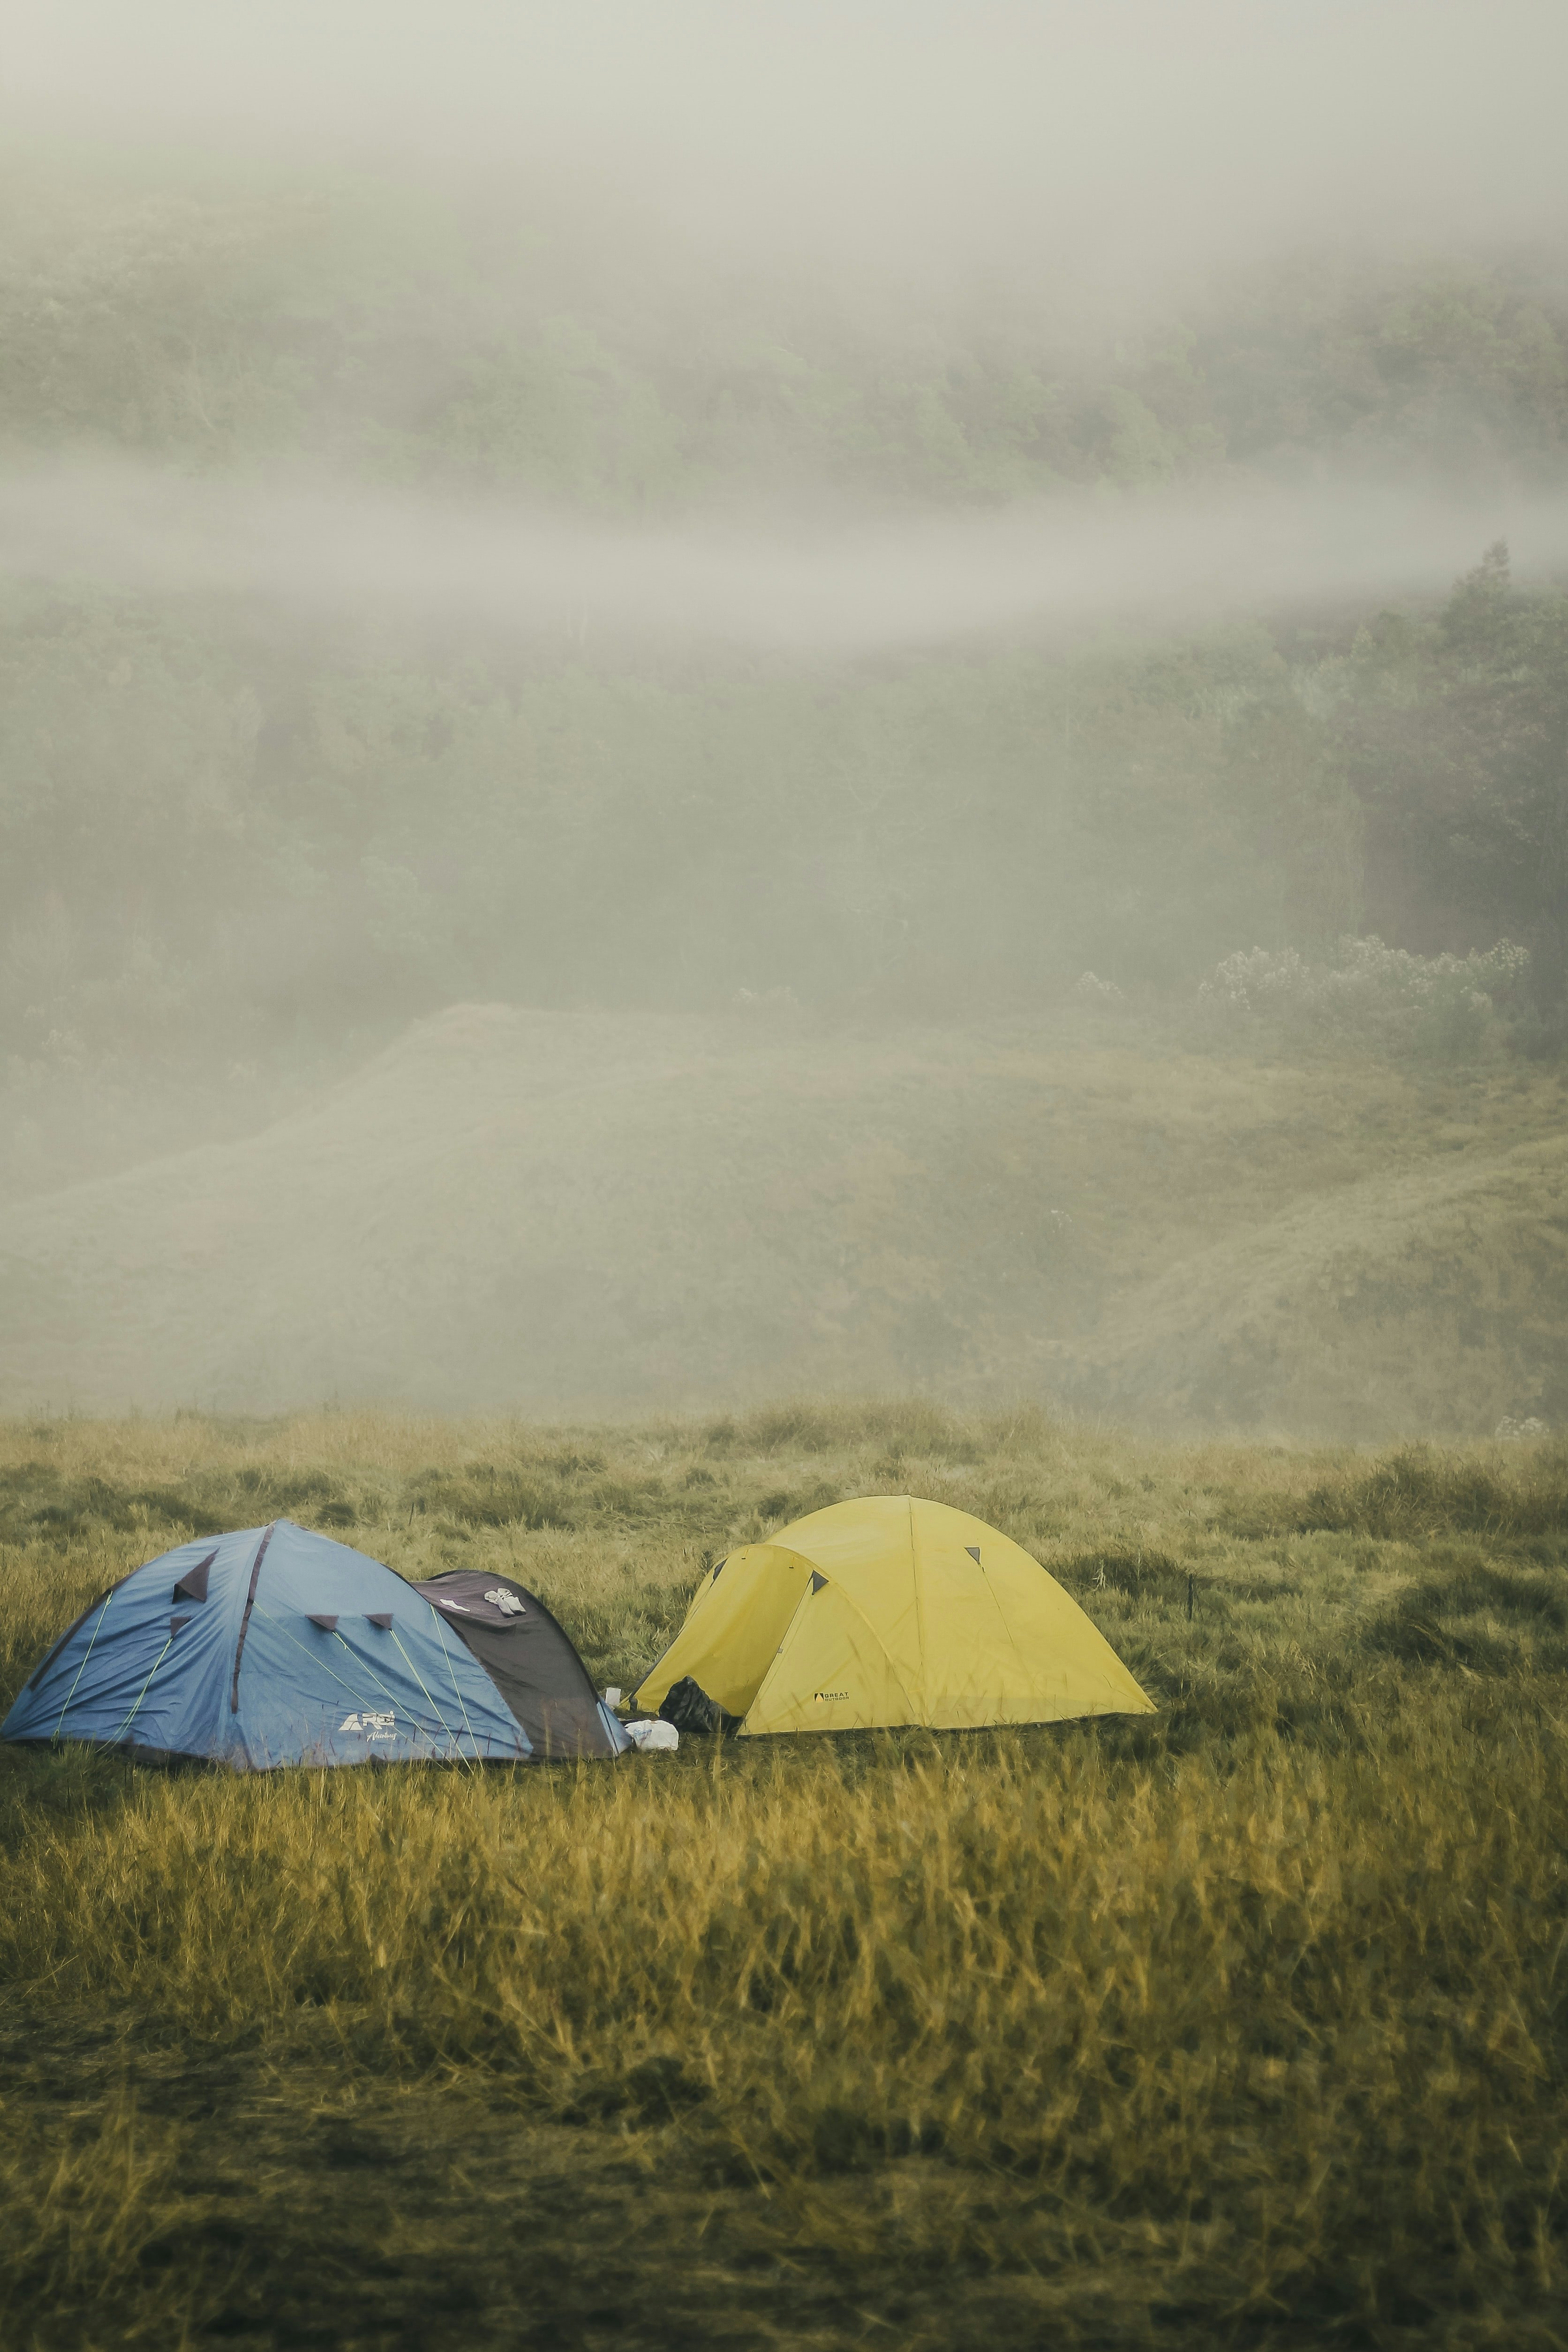 Think carefully about wild camping